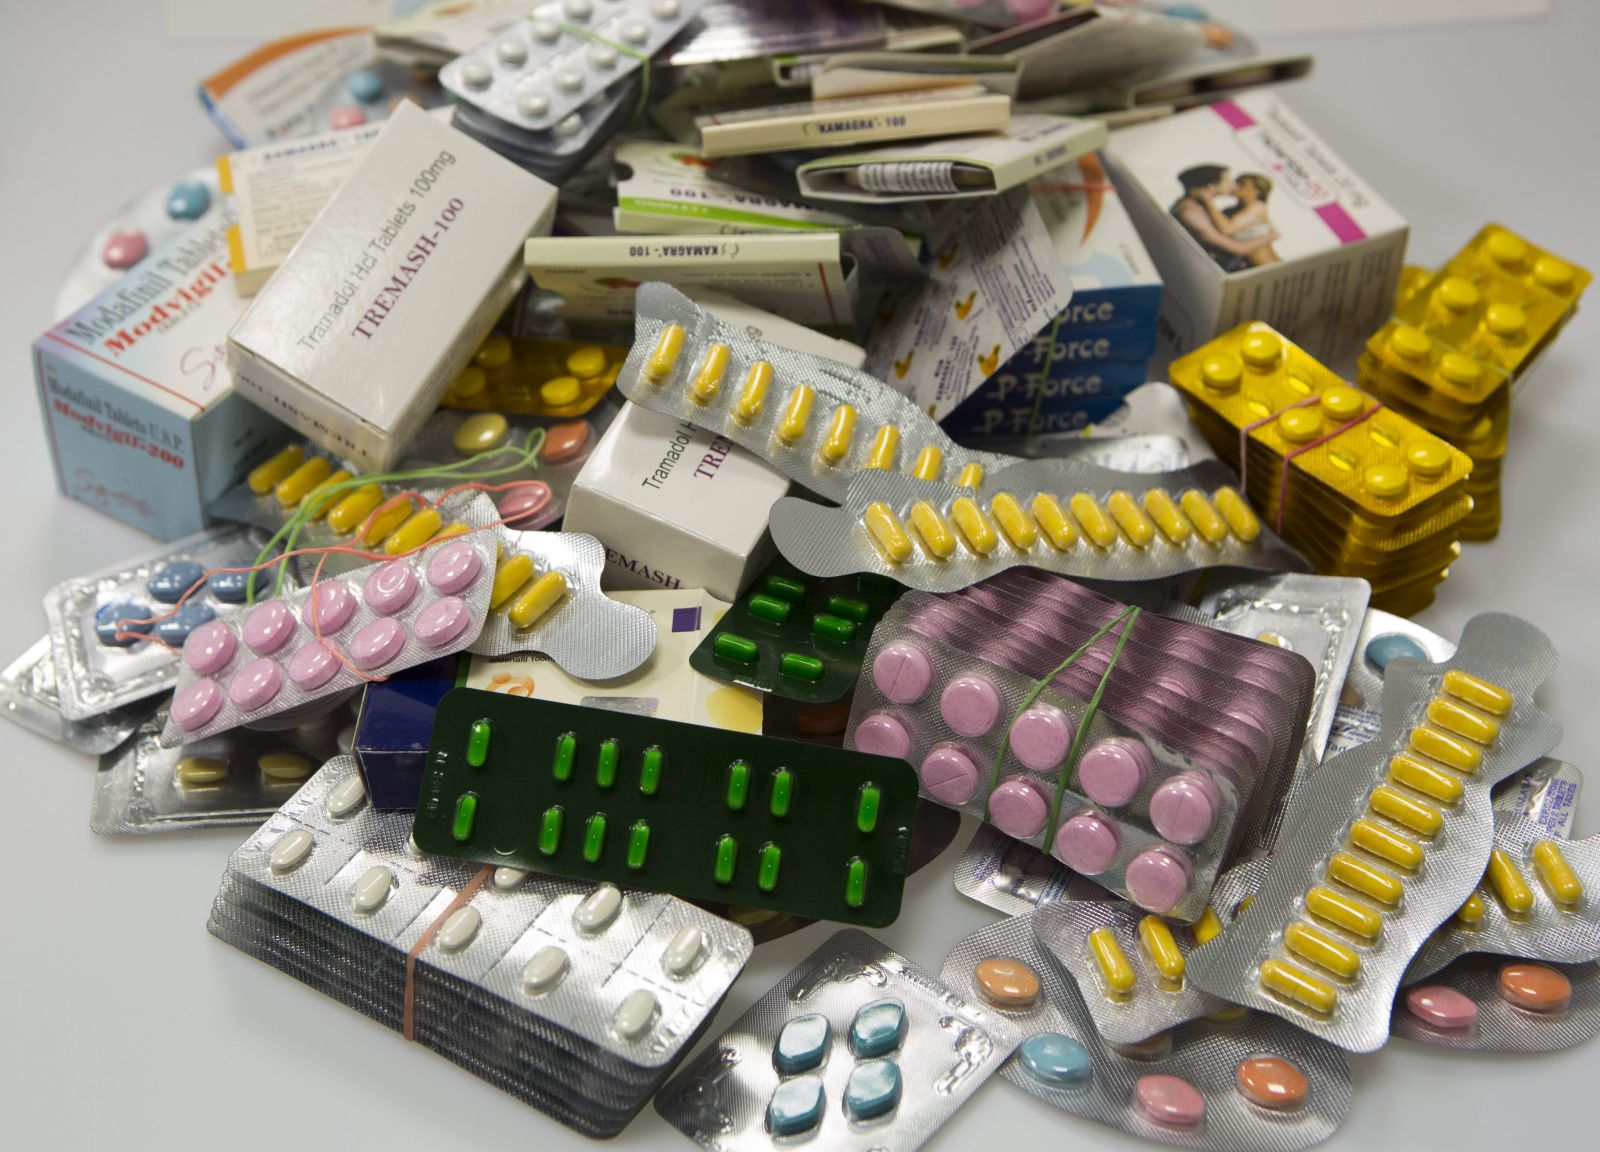 Illegal and counterfeit medicines seized by German customs officers.